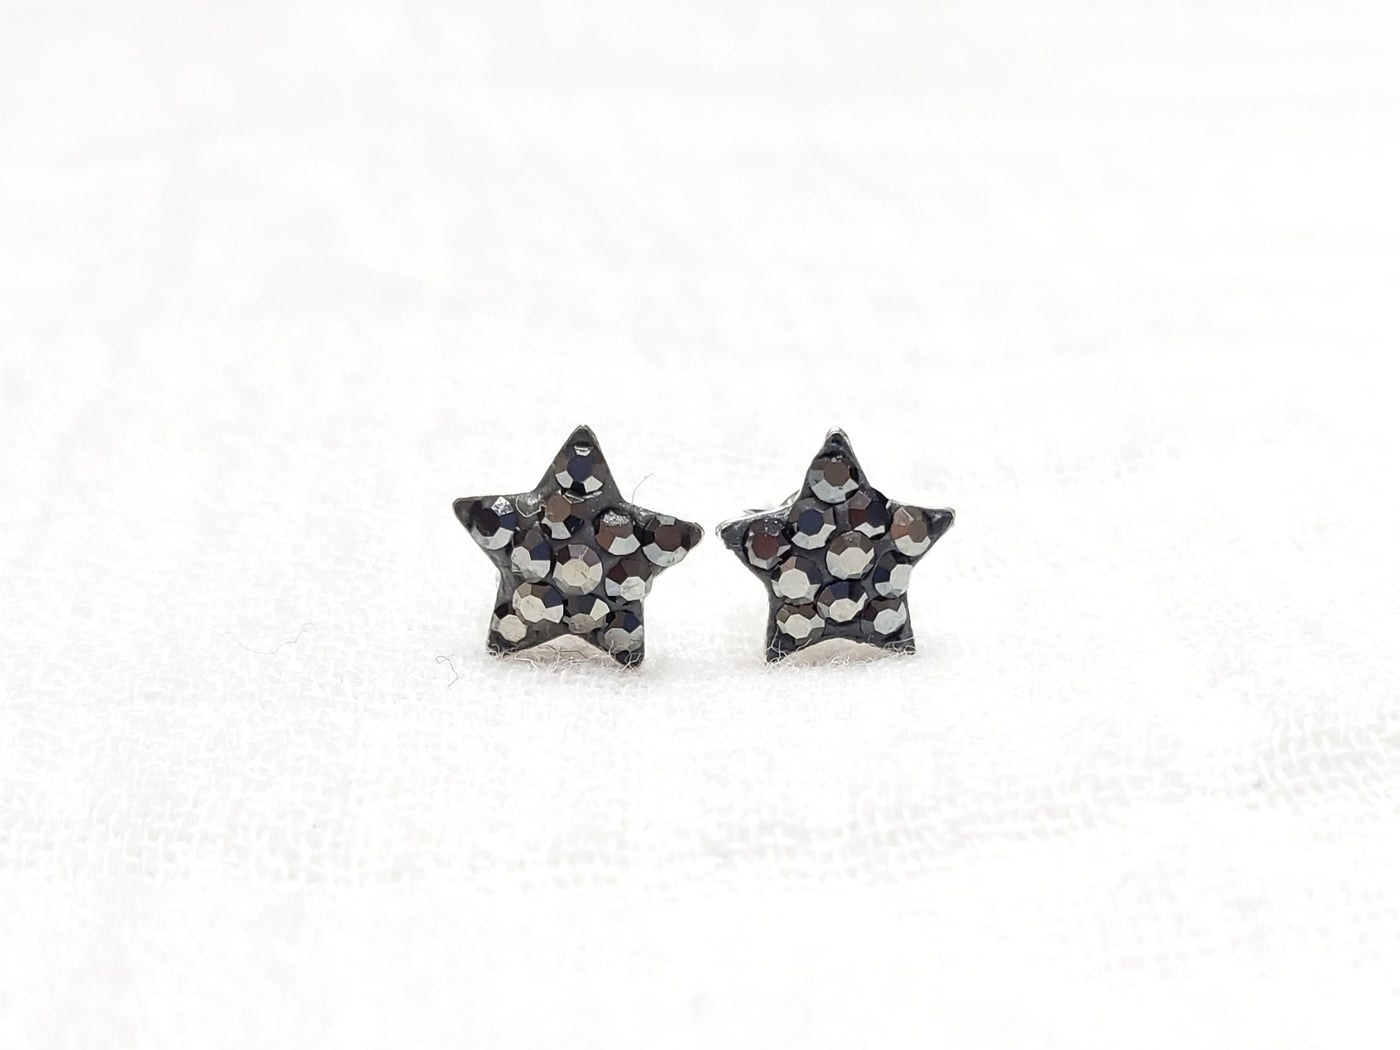 Crystal Star Pave Stud Silver Earrings in Jet Hematite | Annie and Sisters| sister stud earrings, for kids, children's jewelry, kids jewelry, best friend 